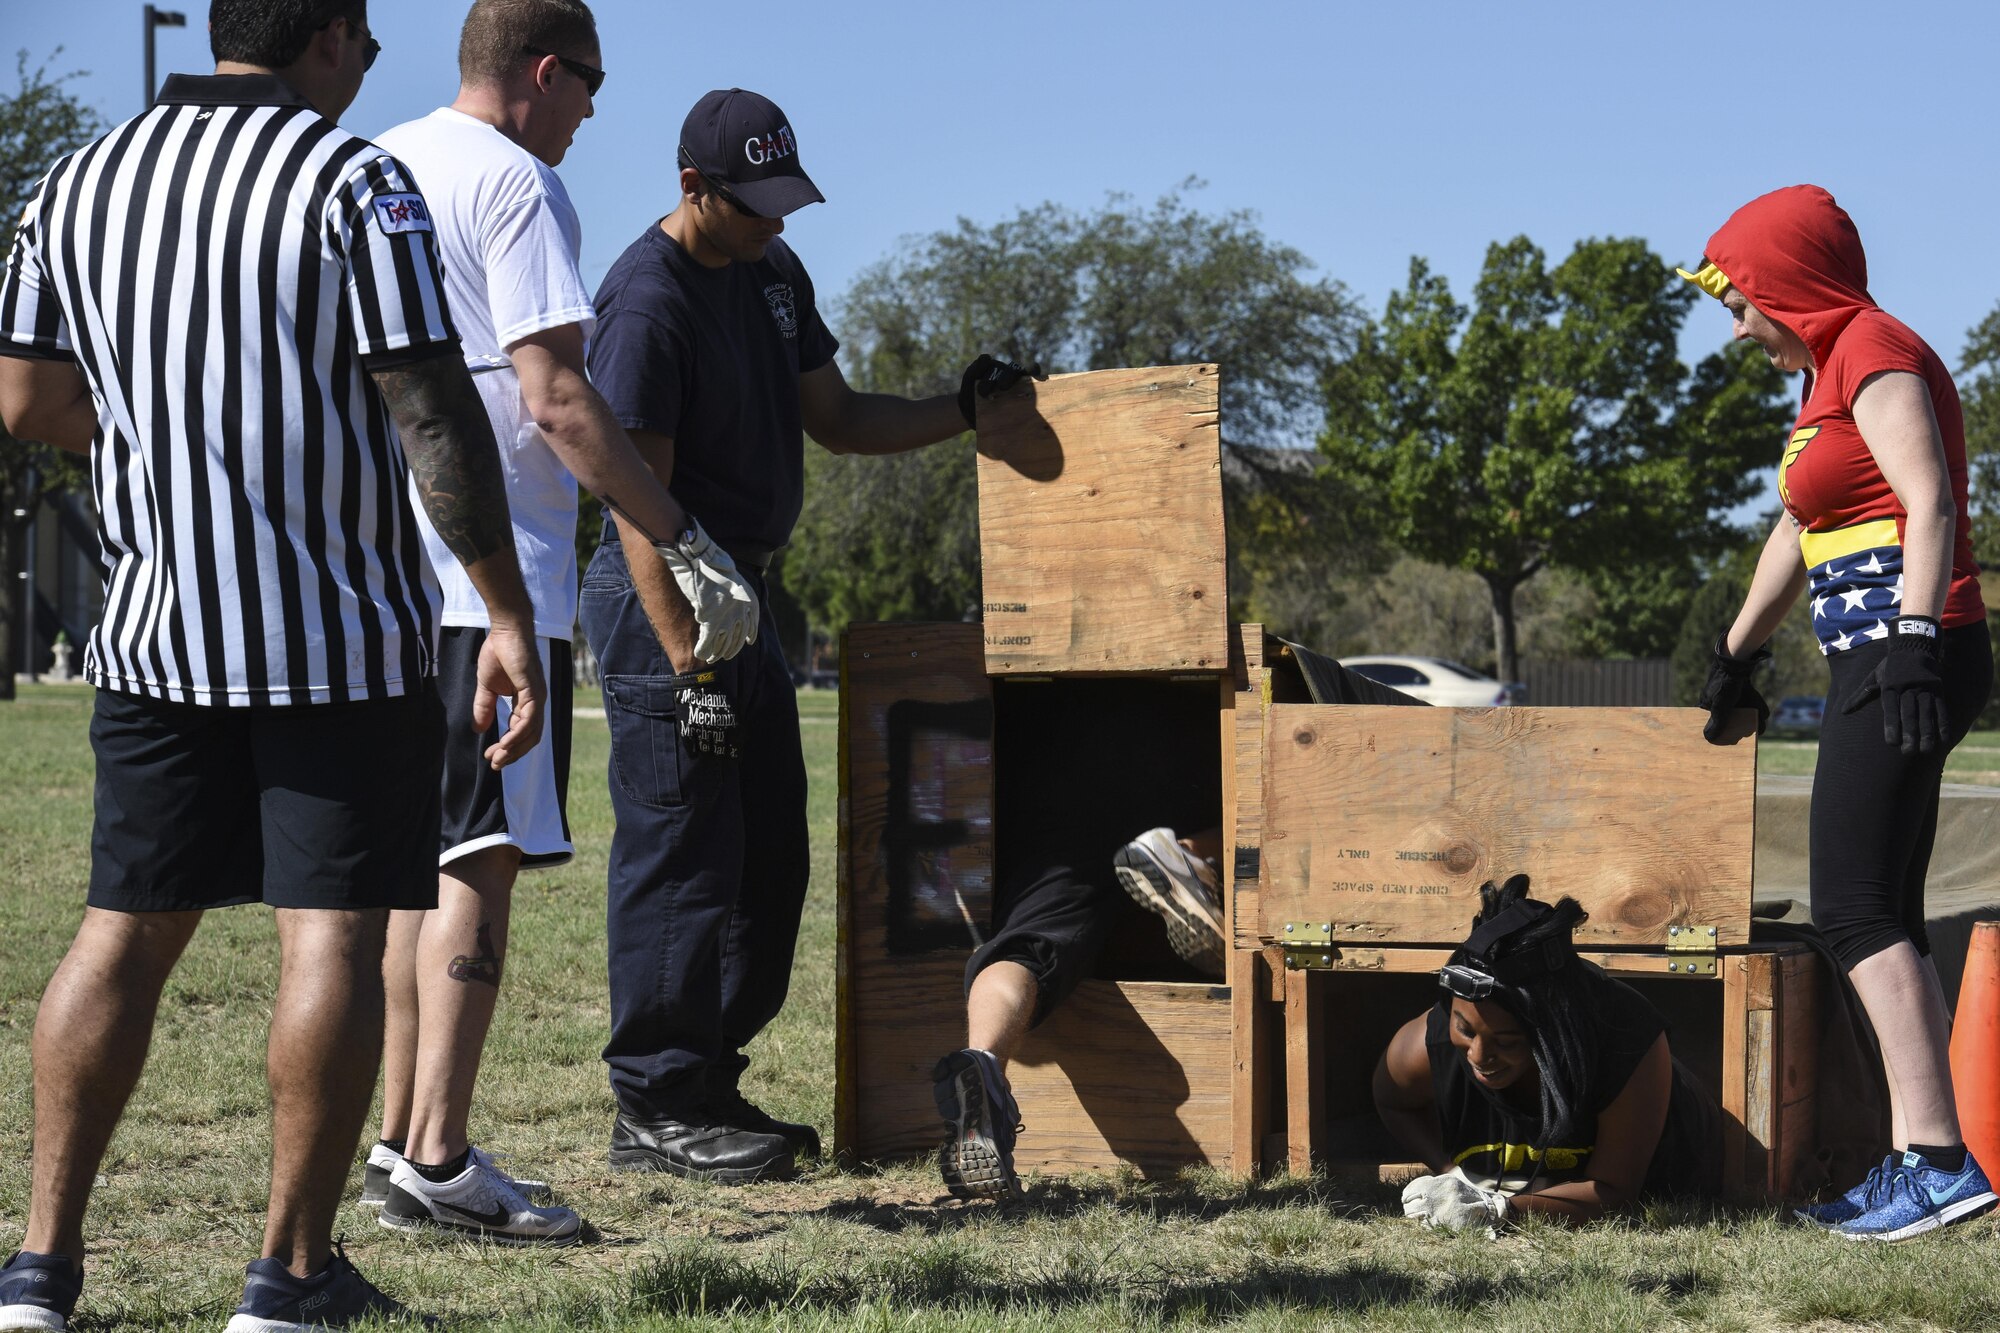 The 17th Training Wing Public Affairs team cheer each other on while completing an obstacle course during the Fire Muster Challenge beside the Fire Department on Goodfellow Air Force Base, Texas Oct. 13, 2017. The course was set up to simulate maneuvering though dark and confined areas. (U.S. Air Force photo by Airman 1st Class Zachary Chapman/Released)